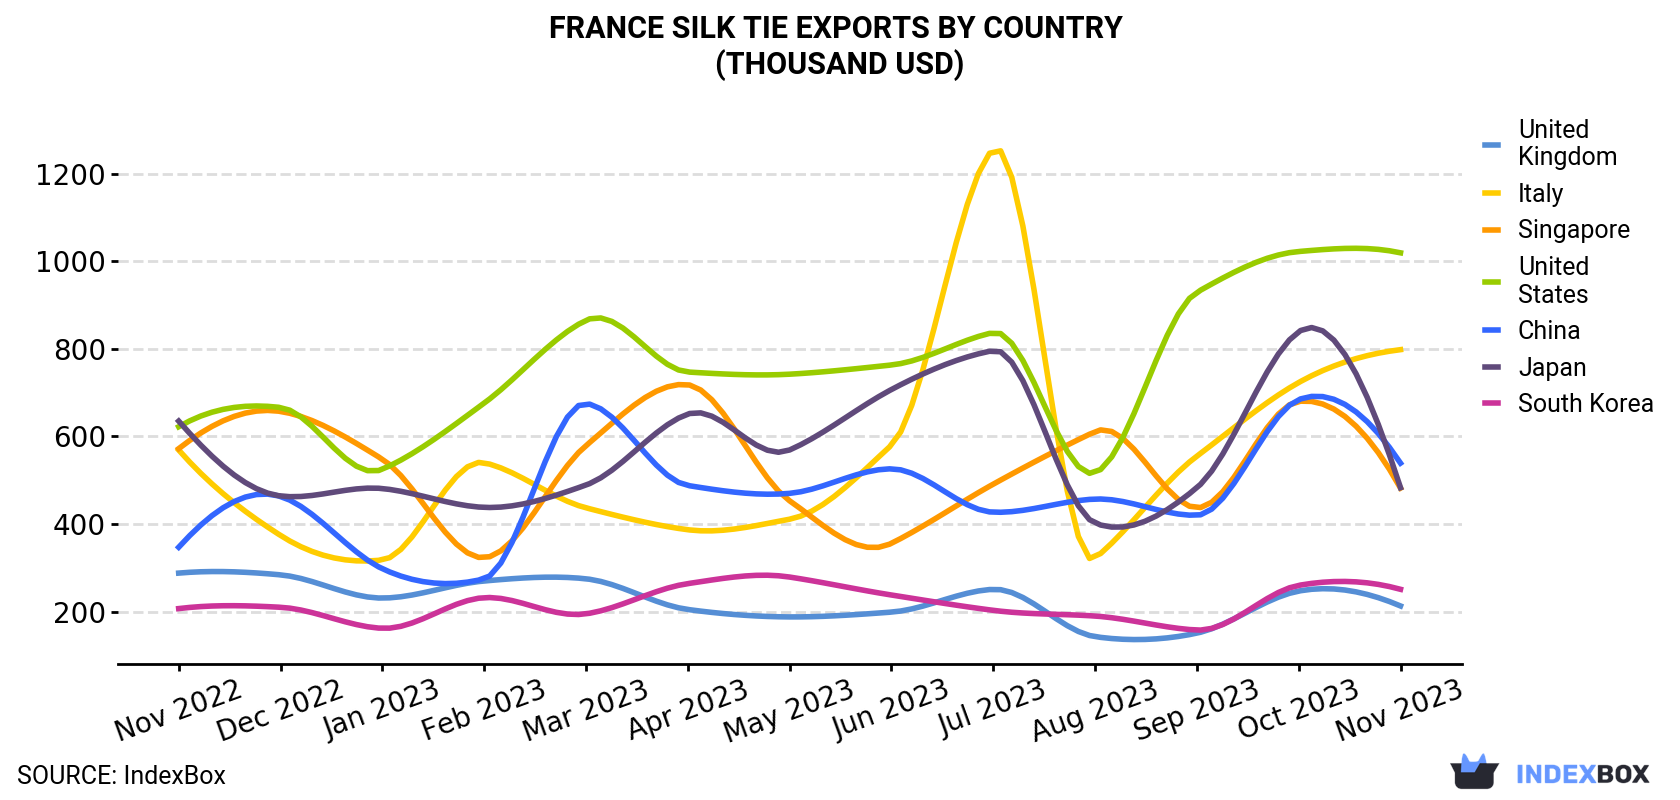 France Silk Tie Exports By Country (Thousand USD)